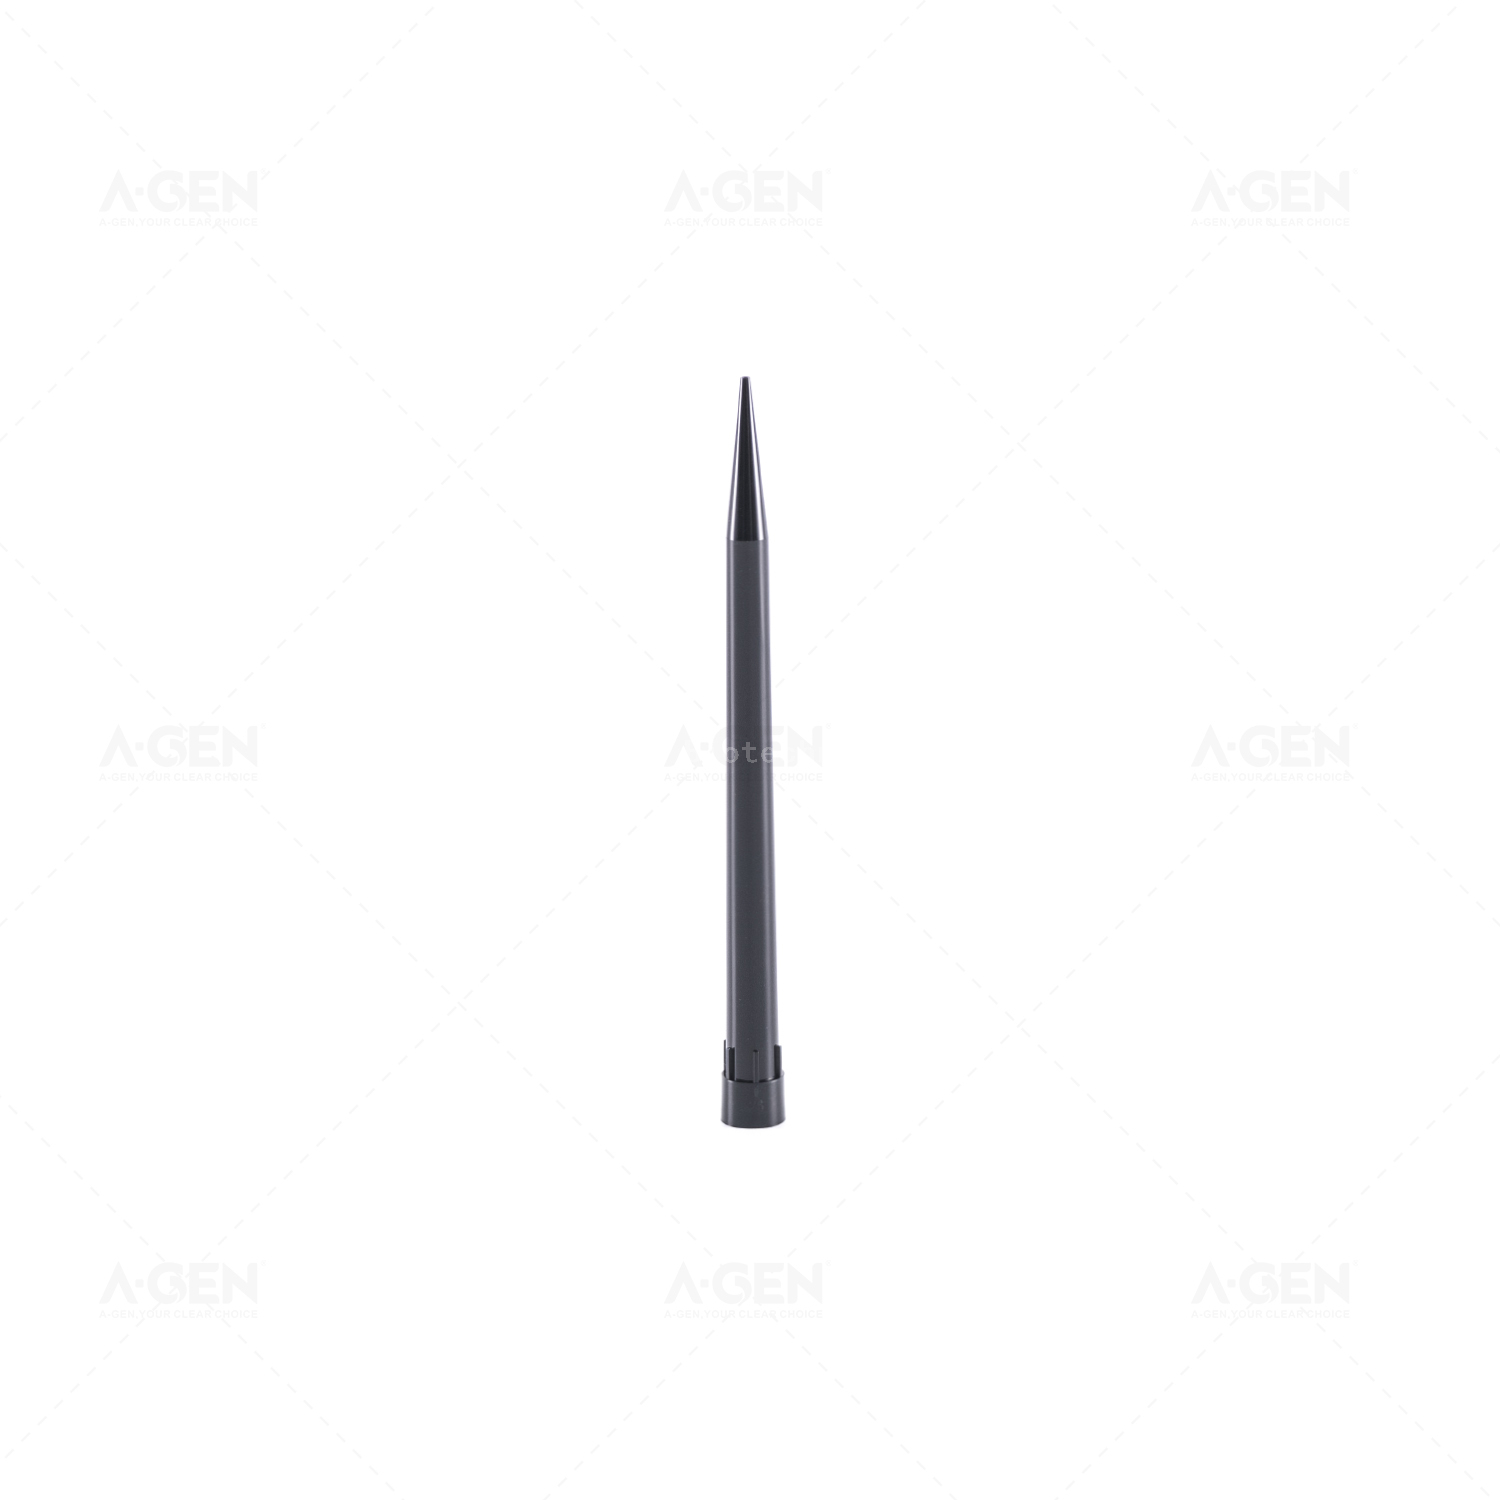 5 Combined Boxes Sterile Hamilton Pipette Tip Conductive 1000μL Black PP Pipette Tip for Liquid Transfer Without Filter